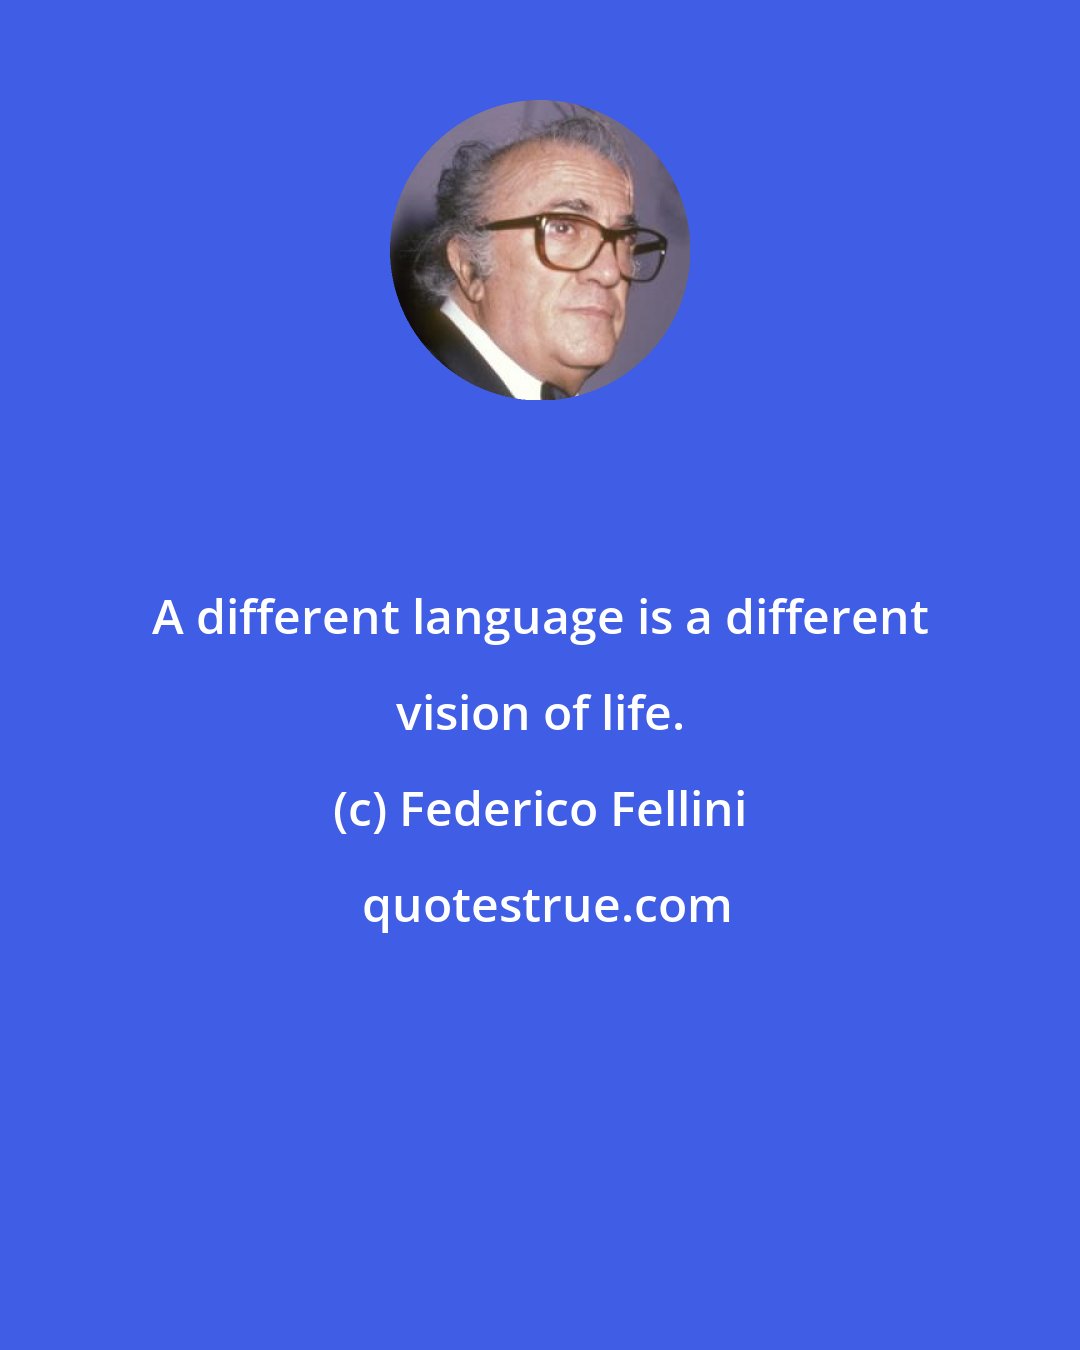 Federico Fellini: A different language is a different vision of life.